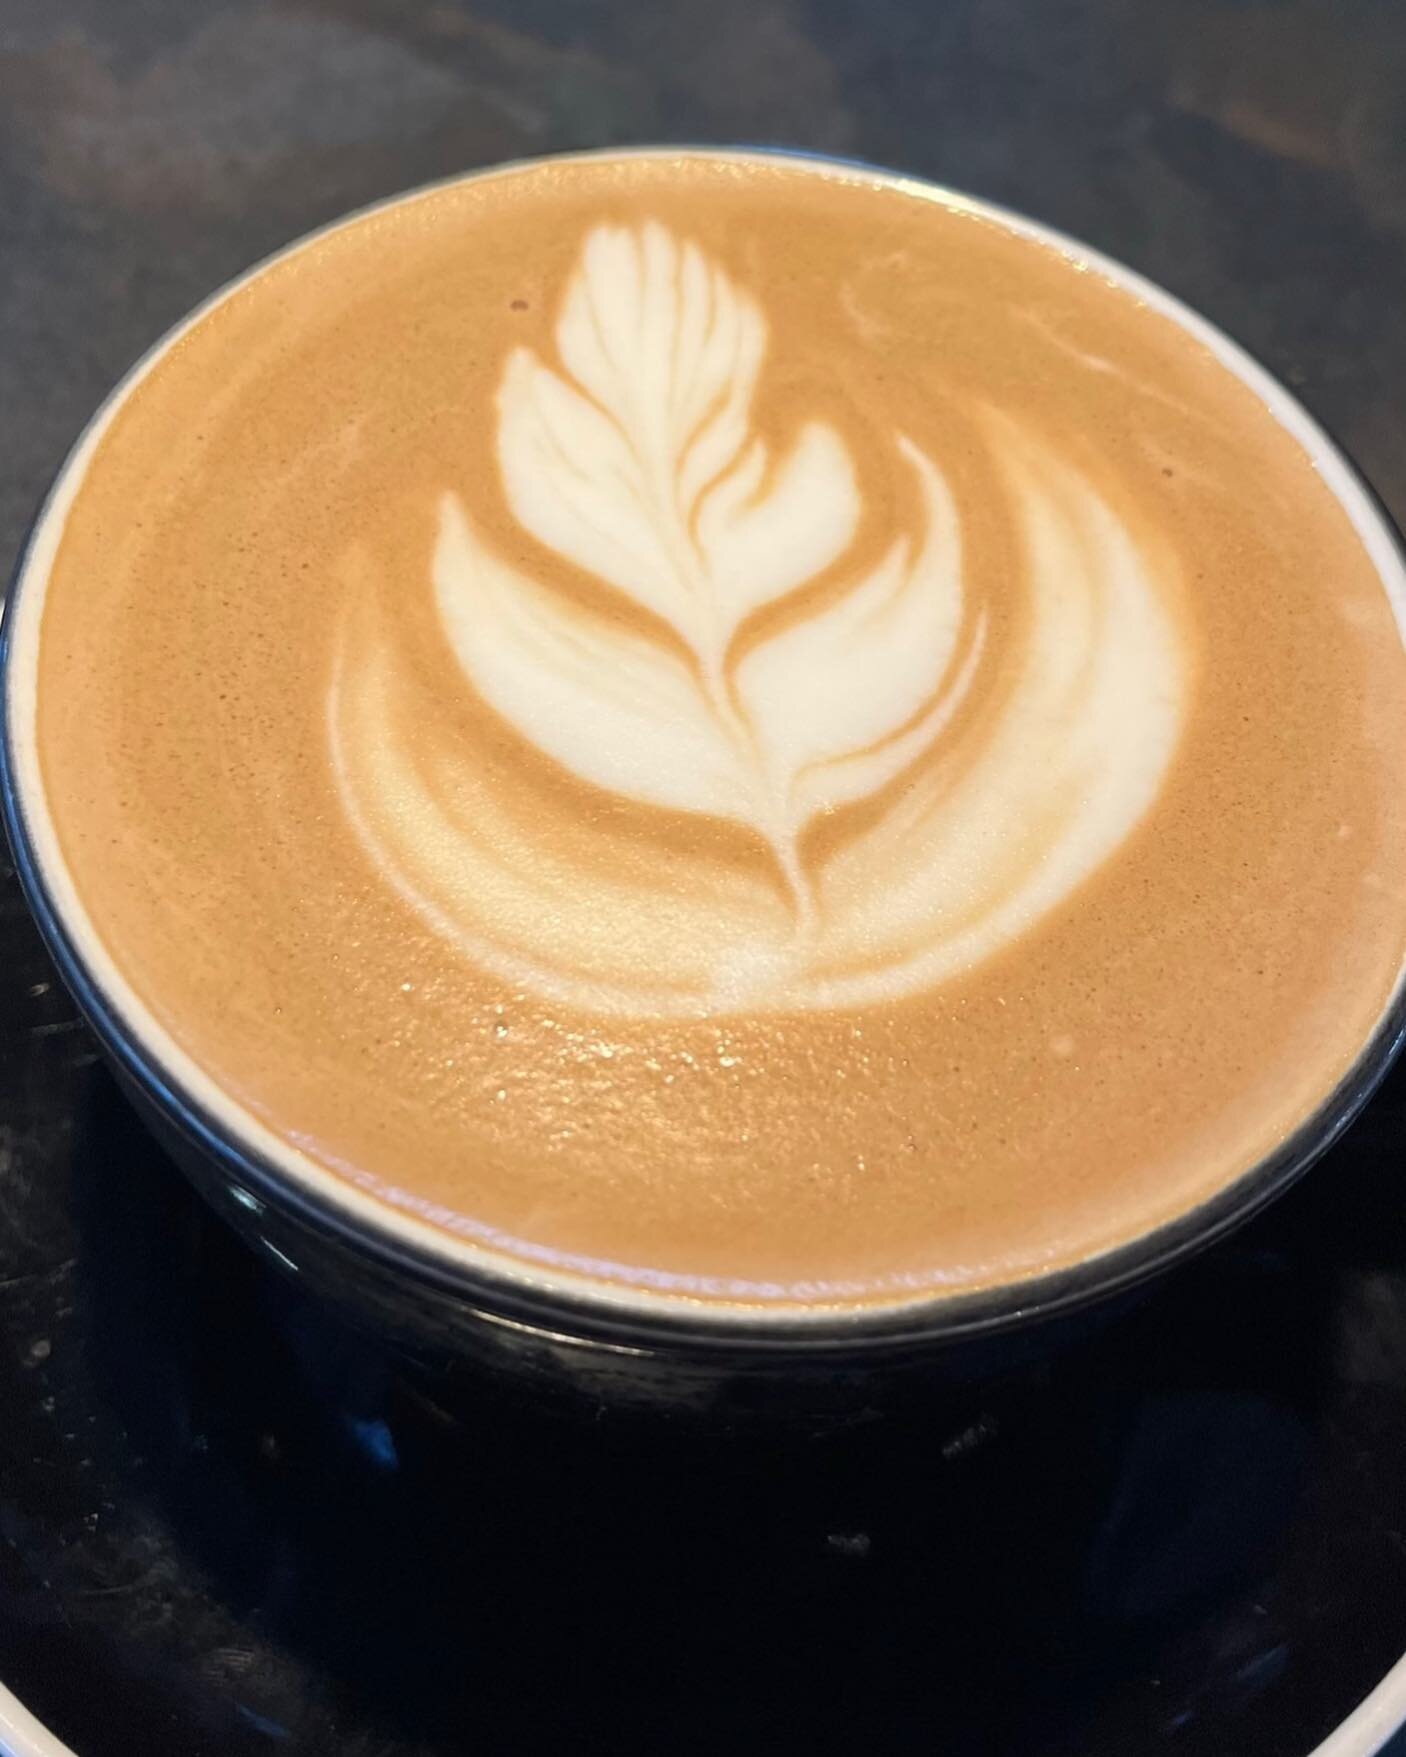 A thousand simple pleasures and acts of kindness create one&rsquo;s life lived well. #simplepleasures #latte #specialtycoffee #goldencolorado #sunnysidedenver #303coffee #coloradocoffee #coloradolife